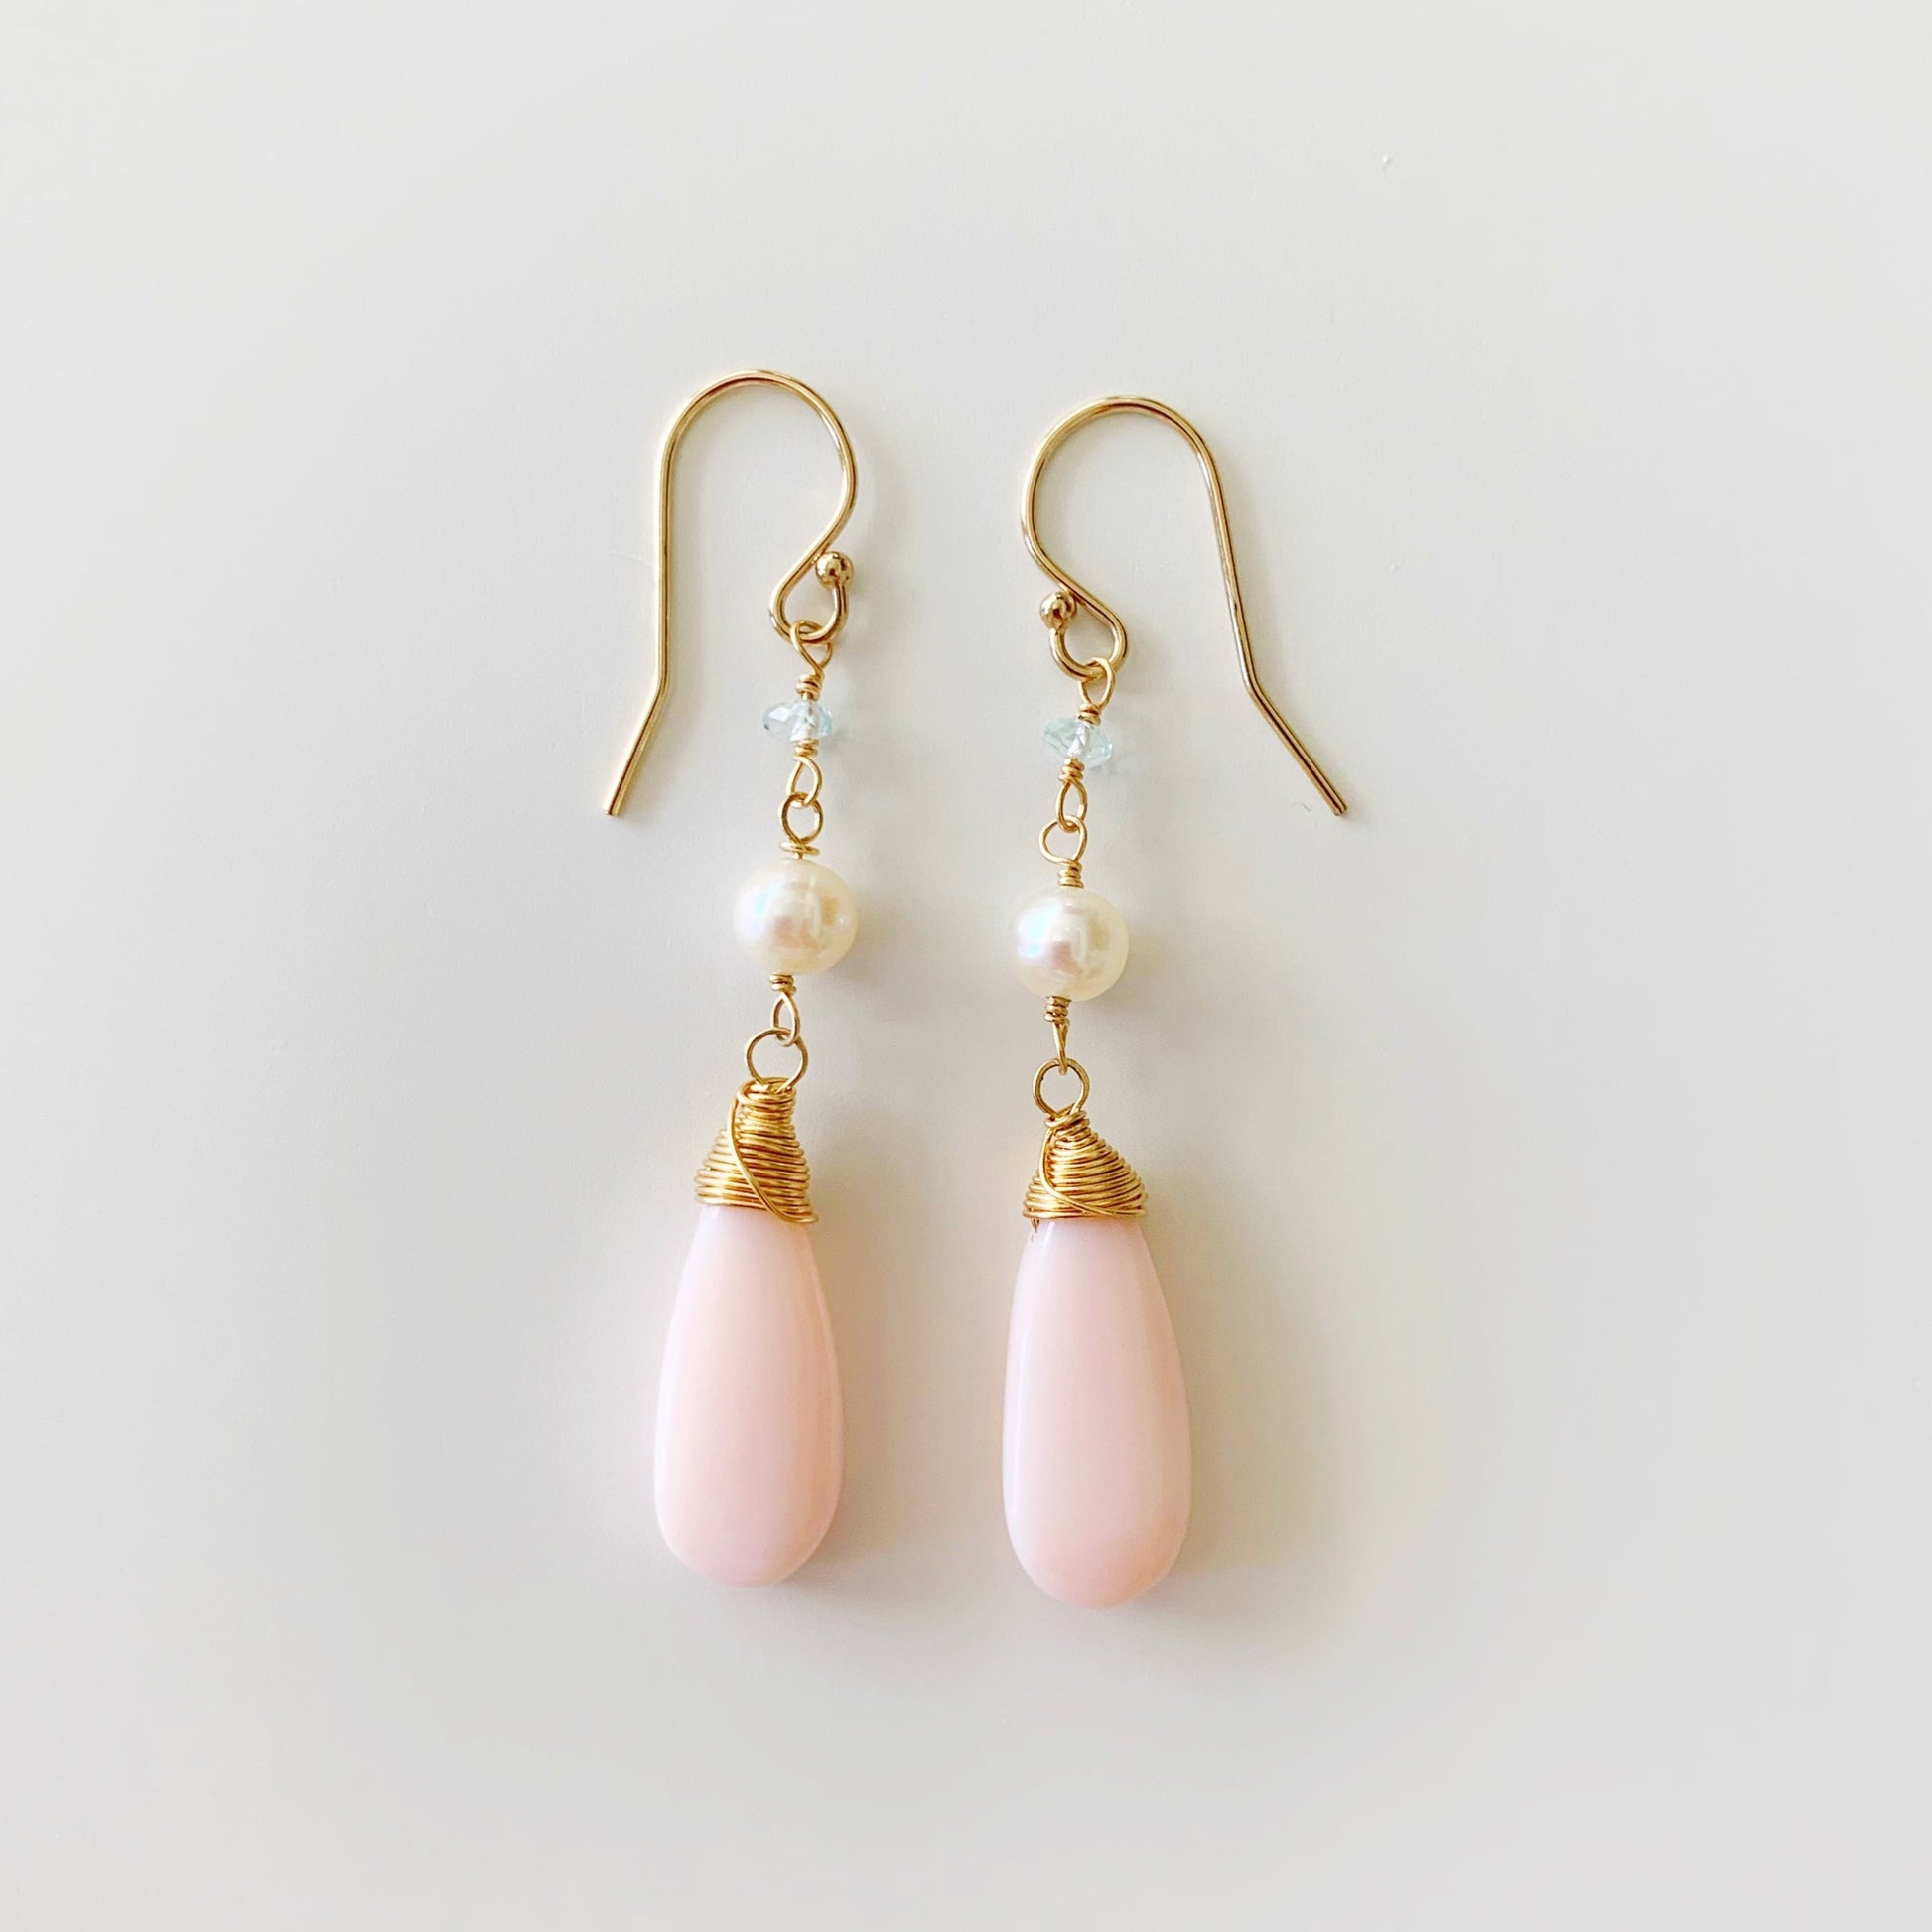 the cotton candy sky earrings by mermaids and madeleines are linear style long earrings with pink opal long drops and freshwater pearl and tiny aquamarine beads with 14k gold filled findings. this pair is photographed flat on a white surface